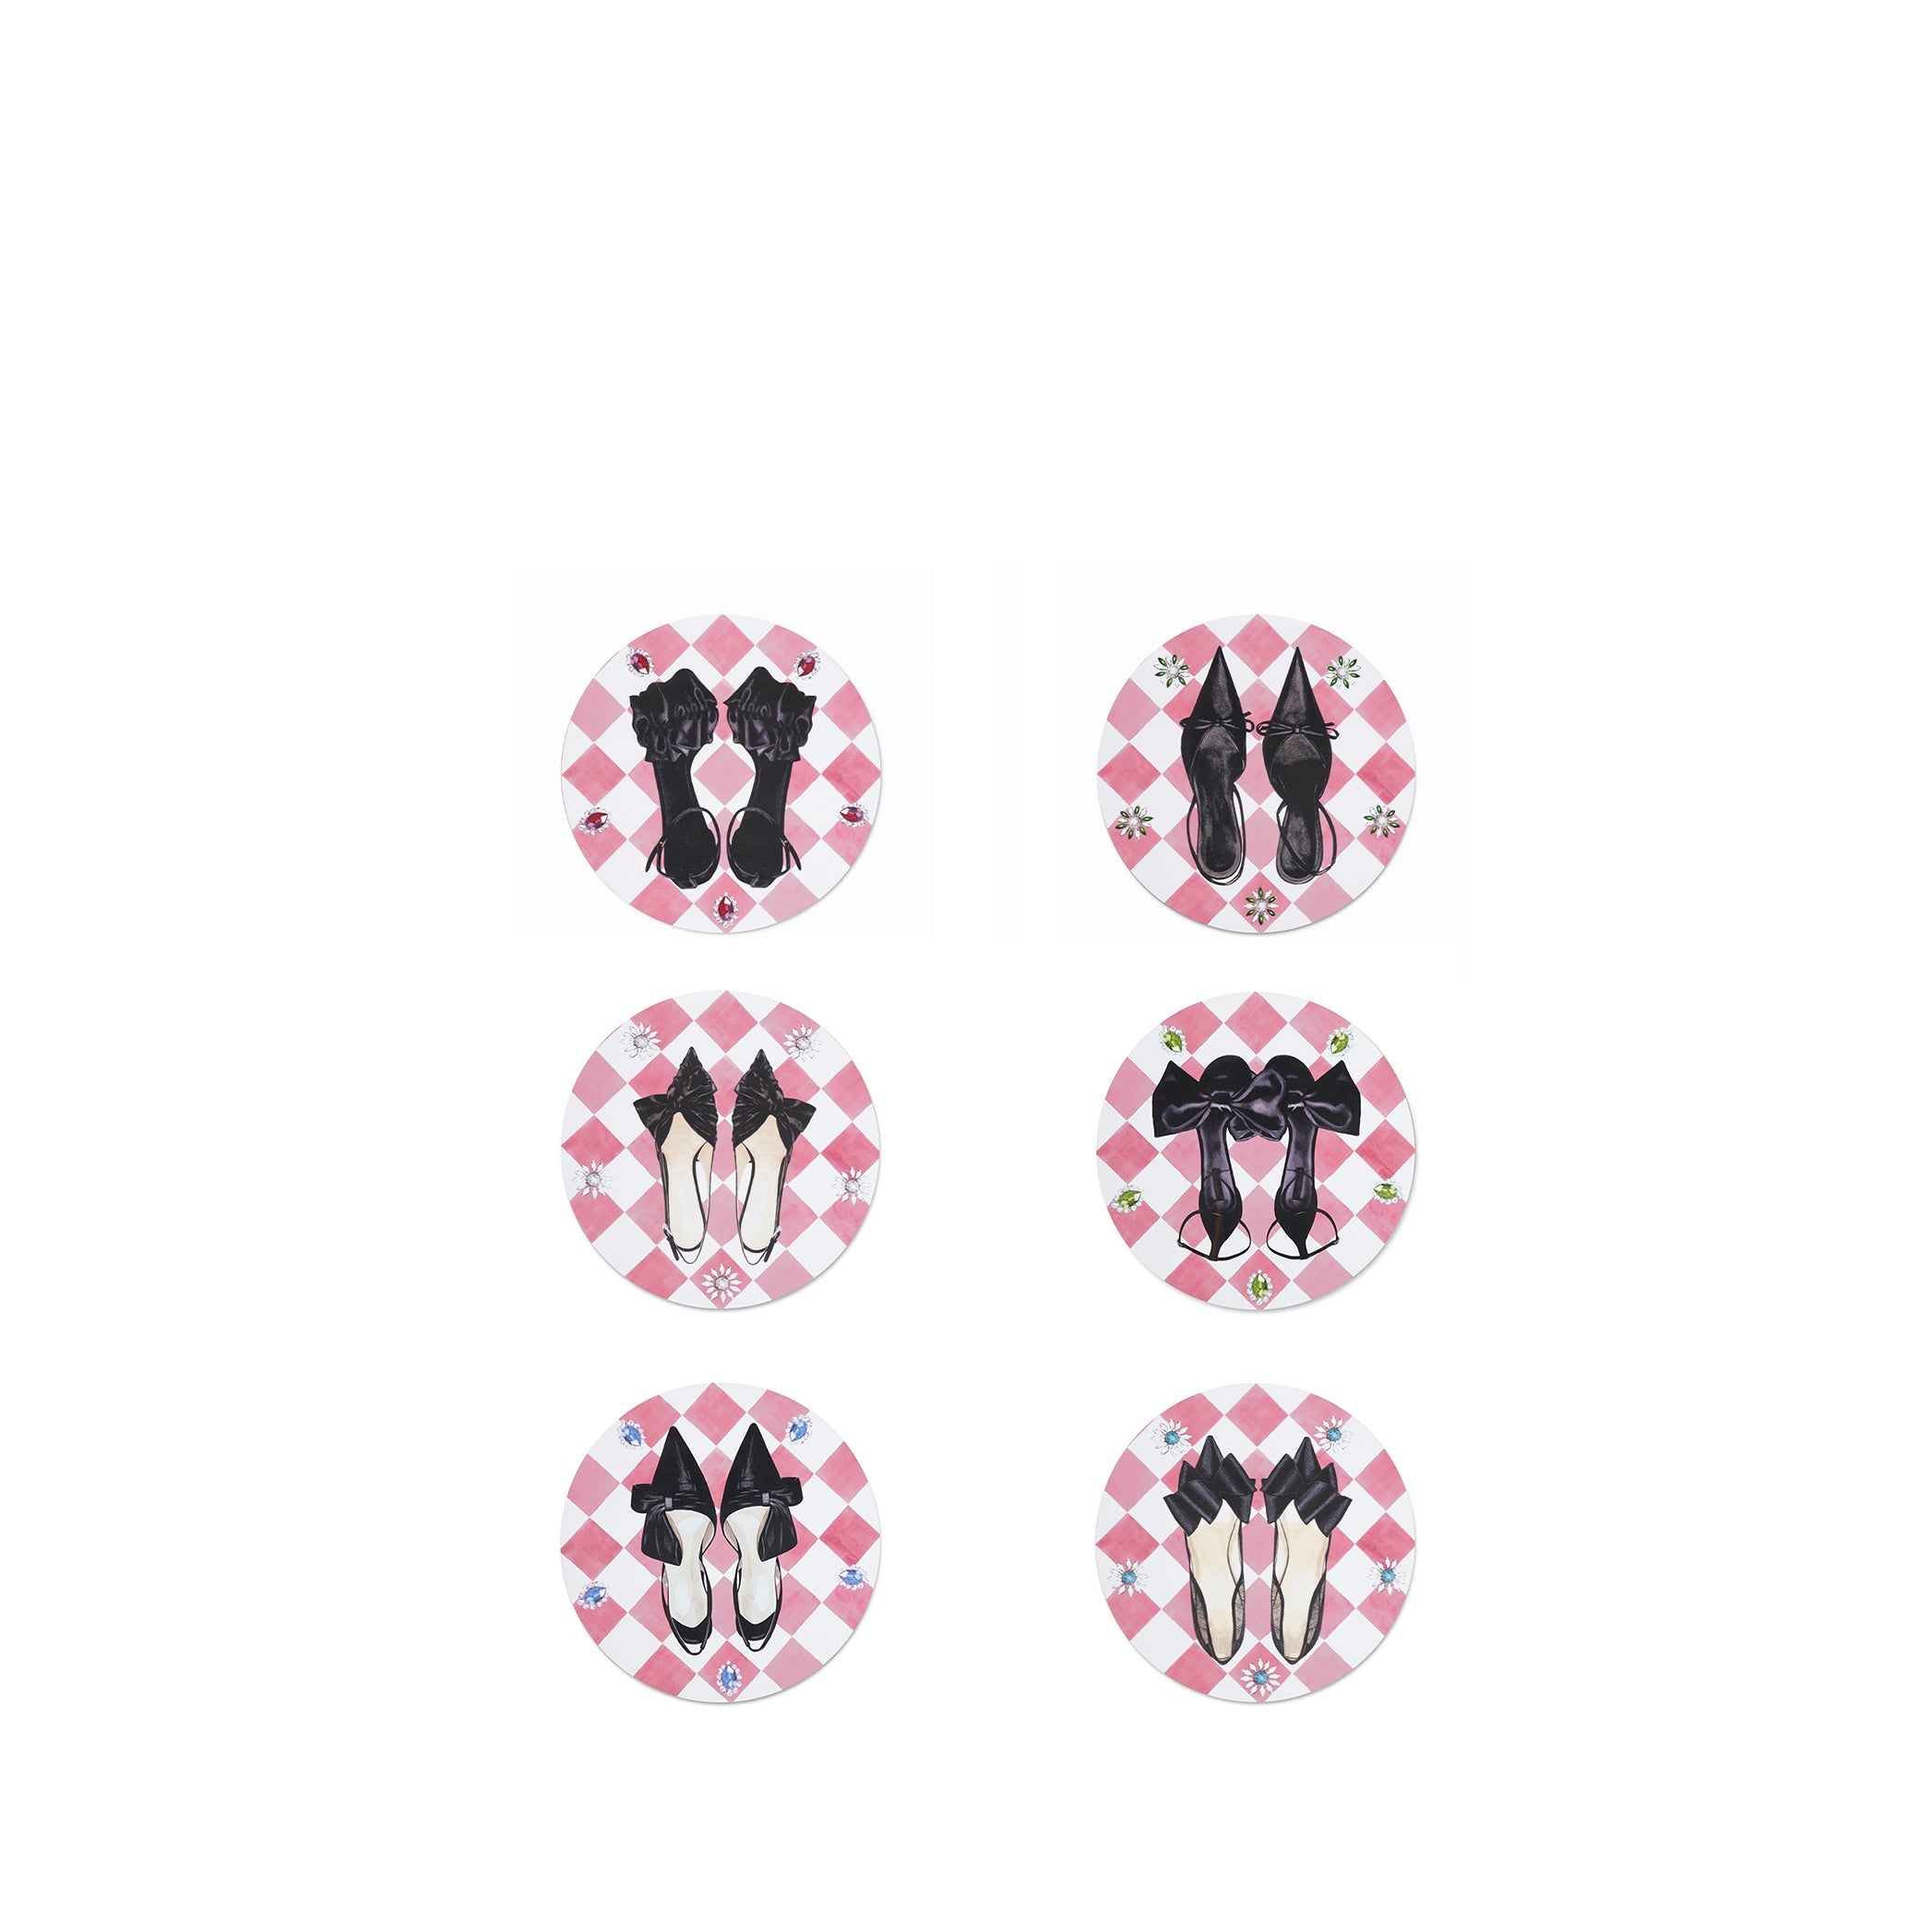 Set of 6 Shoe Check & Crystal Round Cork-Backed Coasters in Rose Pink